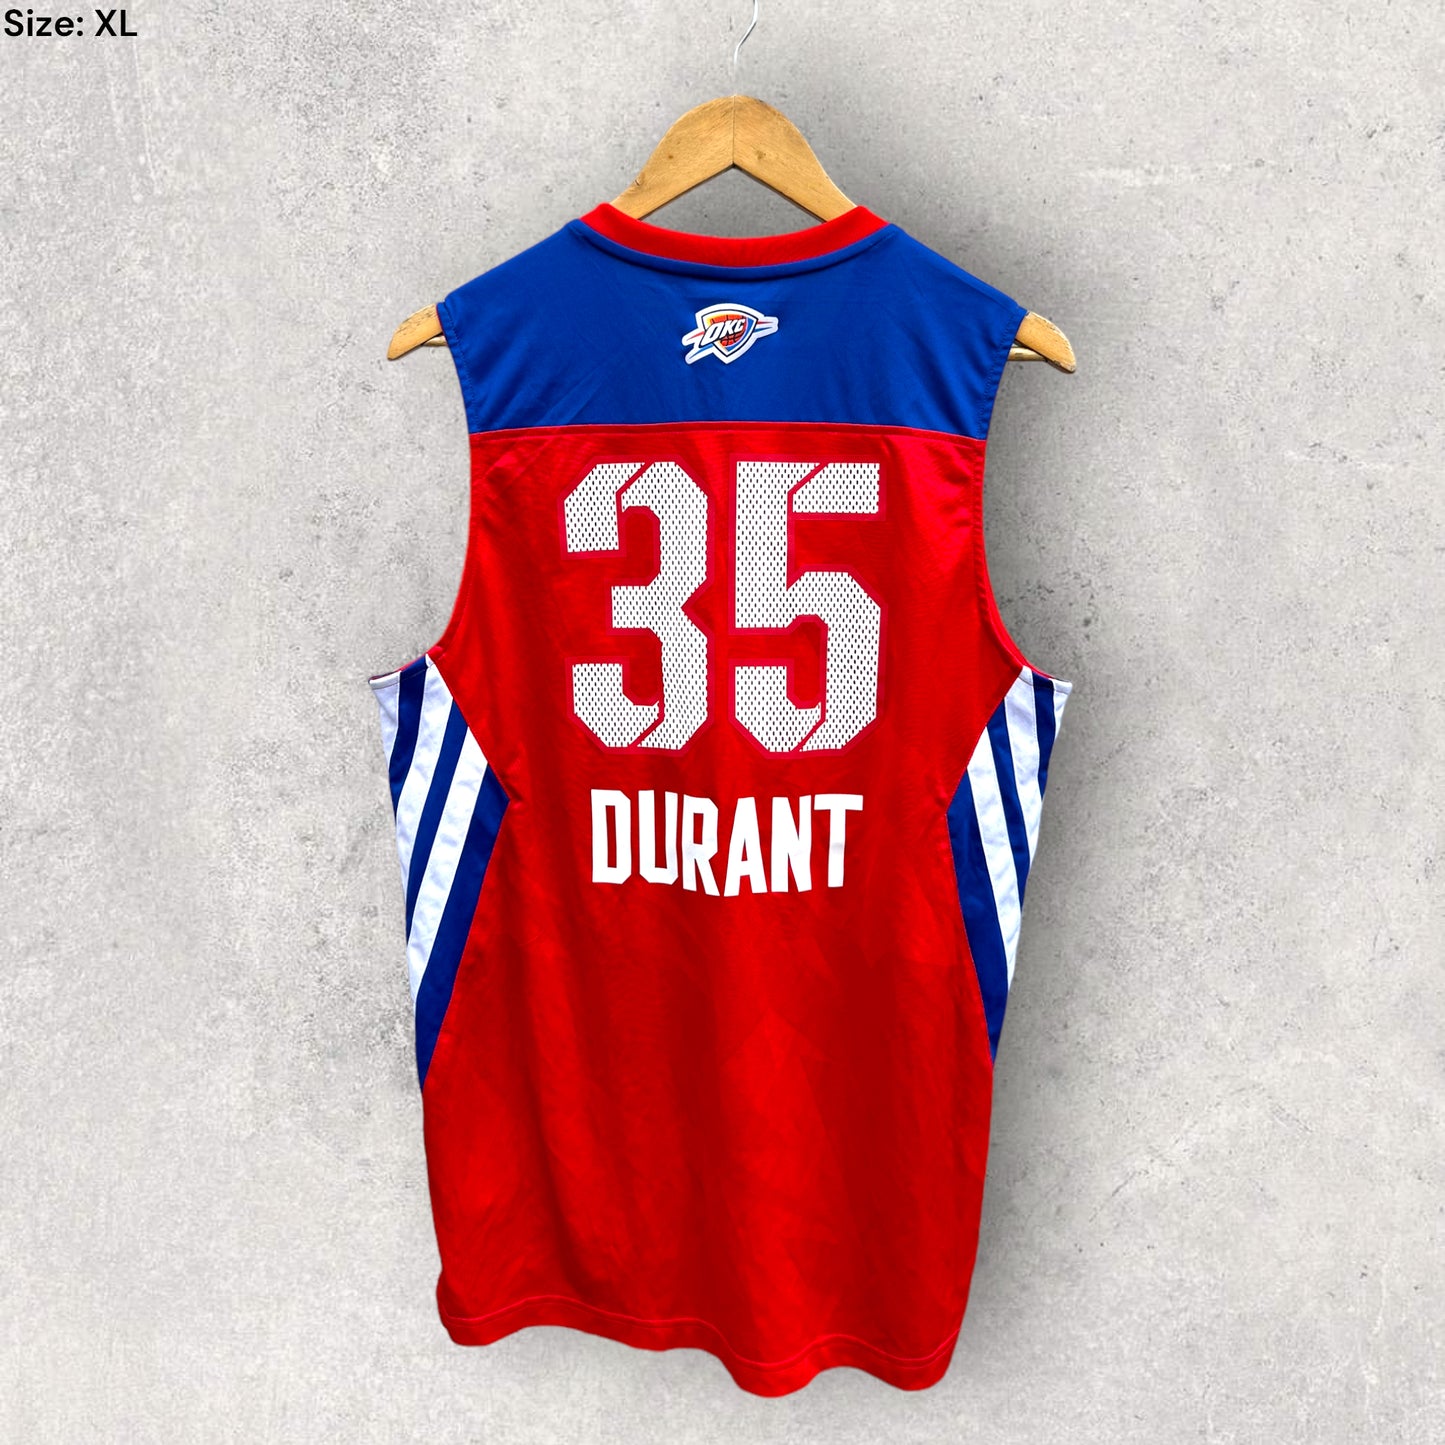 KEVIN DURANT WEST ALL STARS 2013 JERSEY